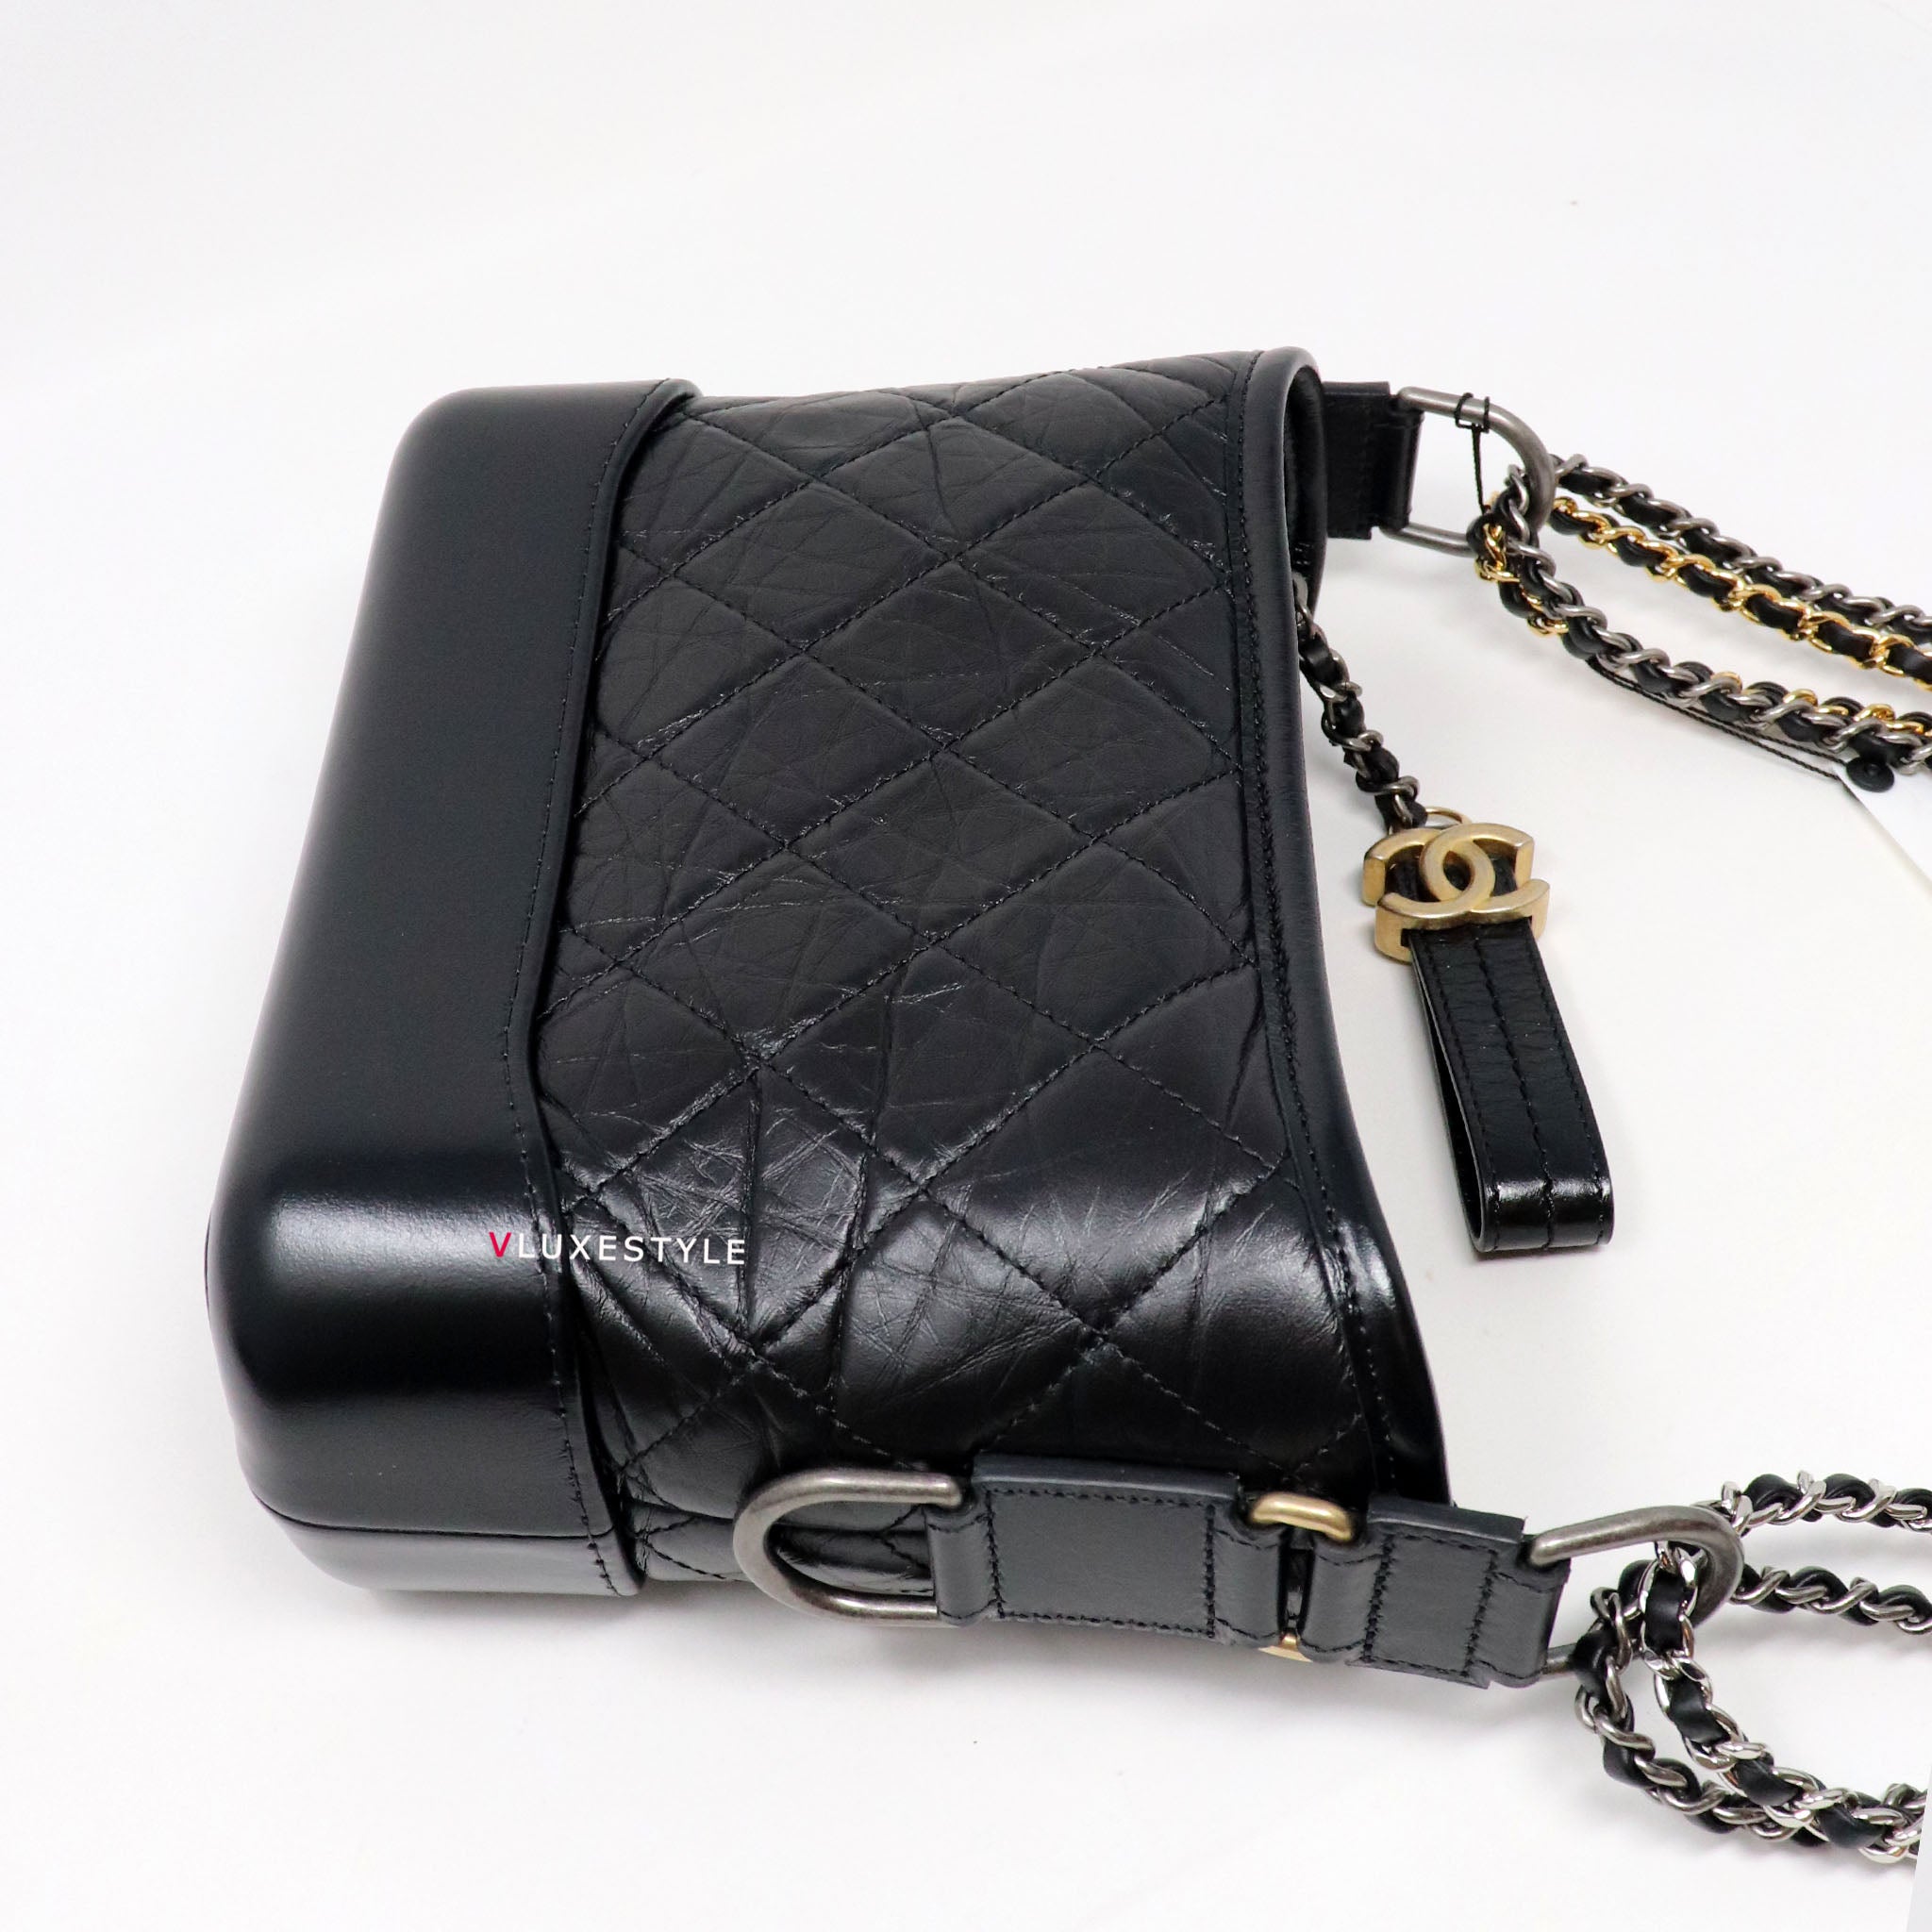 Chanel Calfskin Quilted Small Gabrielle Hobo Black Mixed Hardware – Coco  Approved Studio